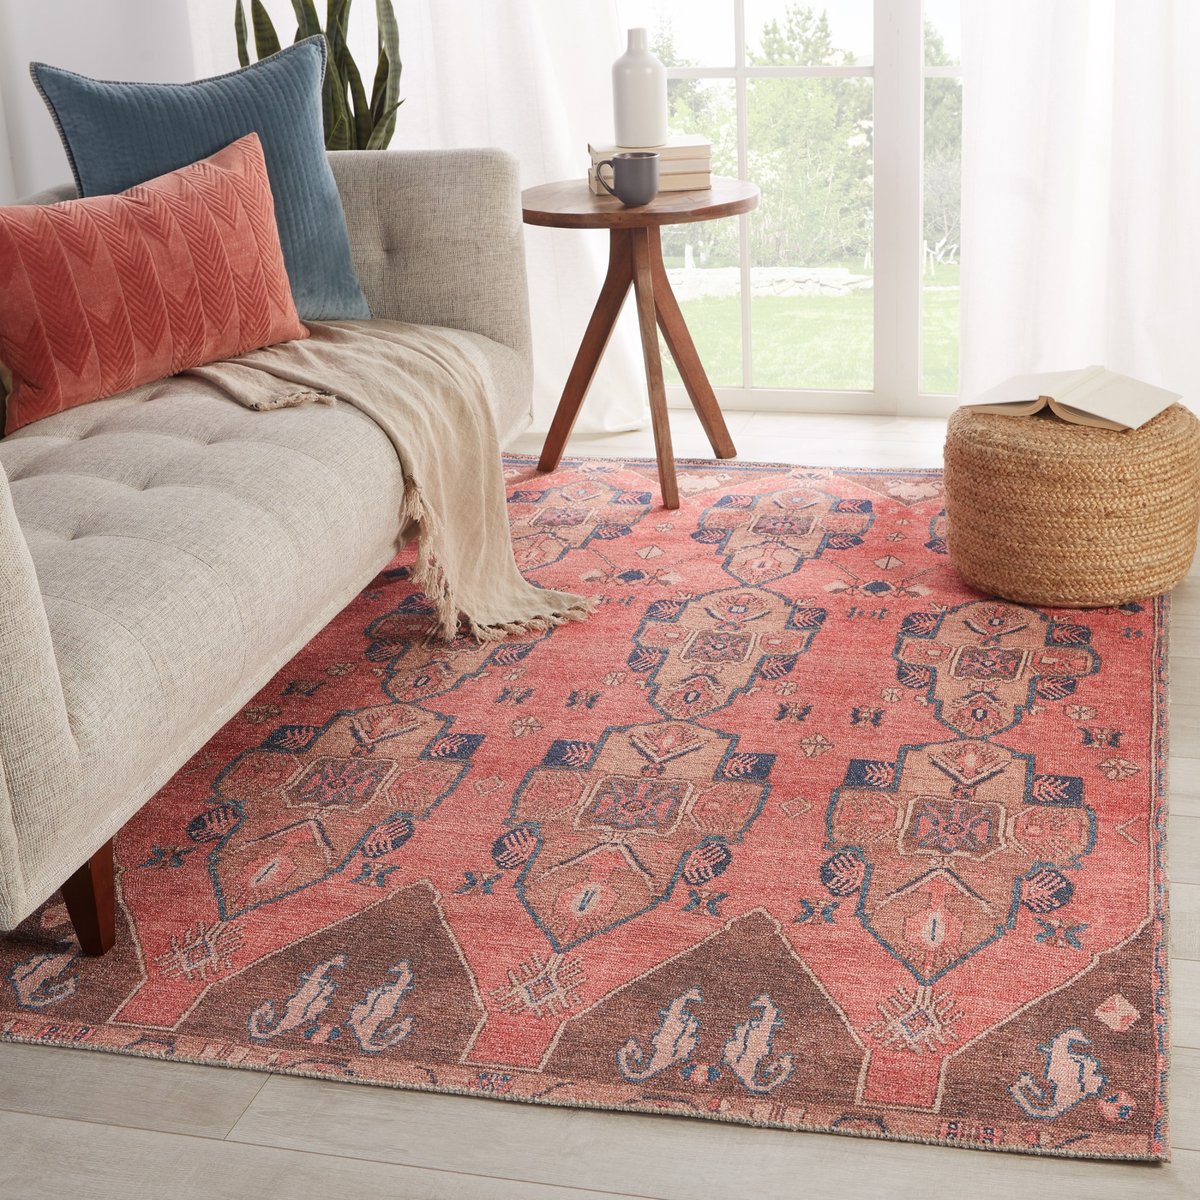 Vibe By Jaipur Living Kairos Lani, Rooms To Go Area Rugs